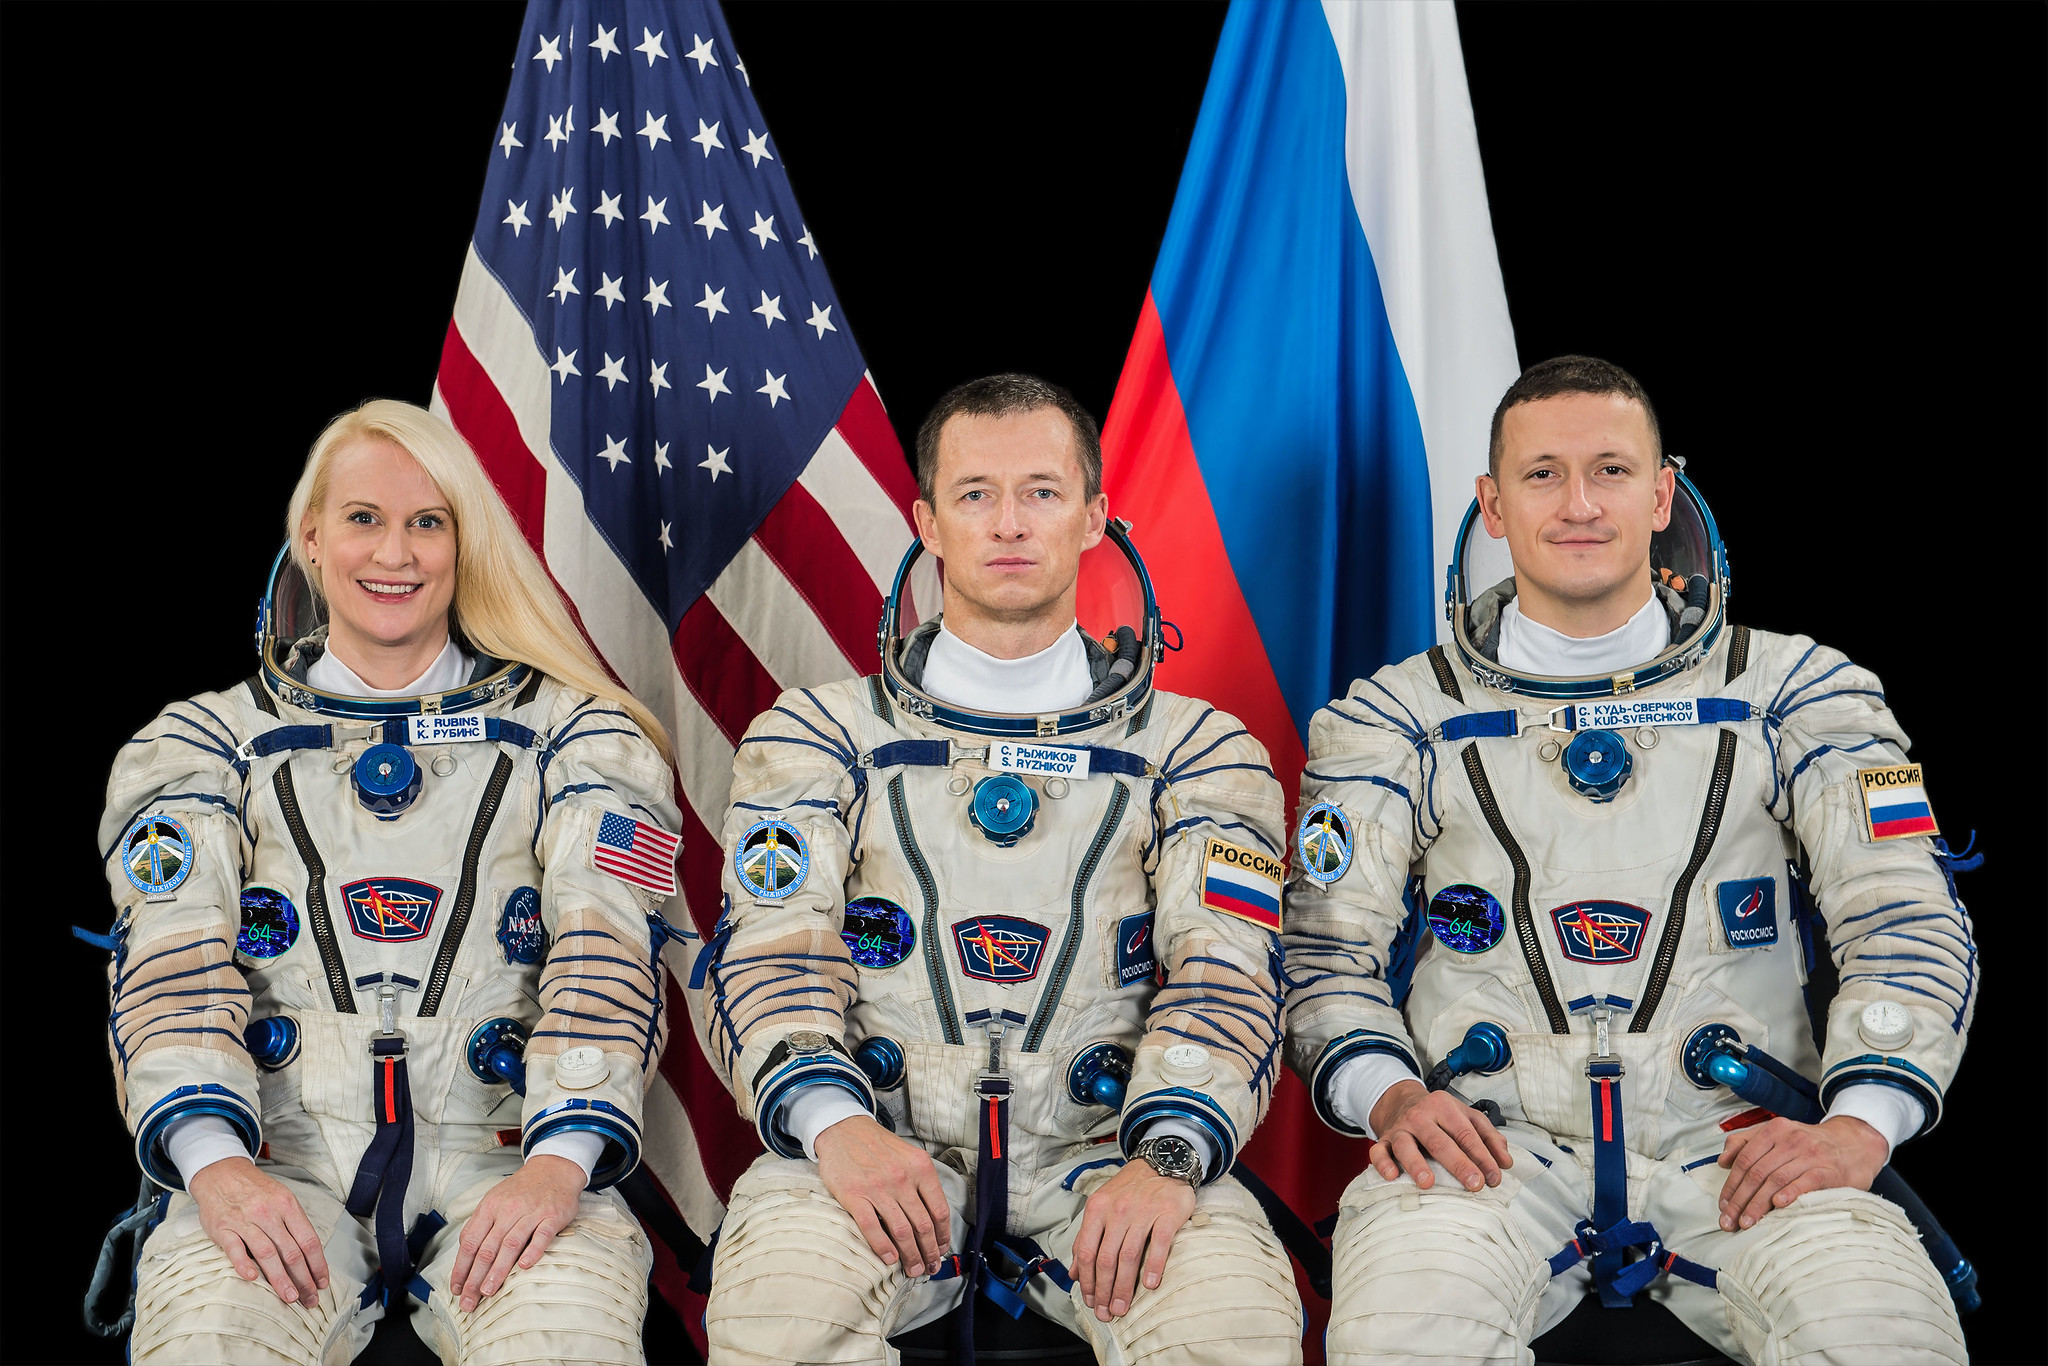 Expedition 64 crew members pose for portrait.